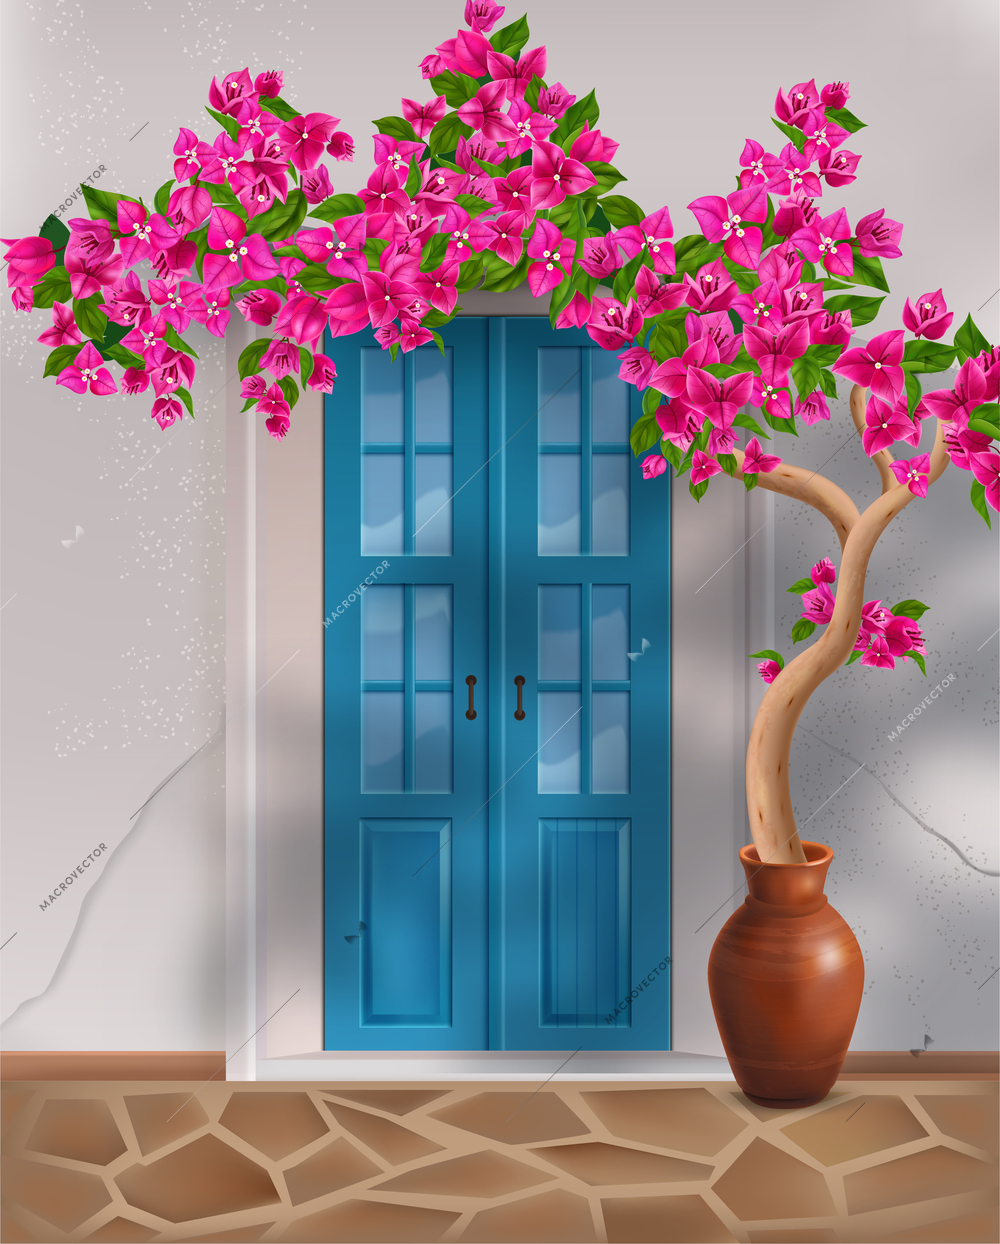 Bougainvillea tree growing in clay pot next to front door of house realistic composition vector illustration